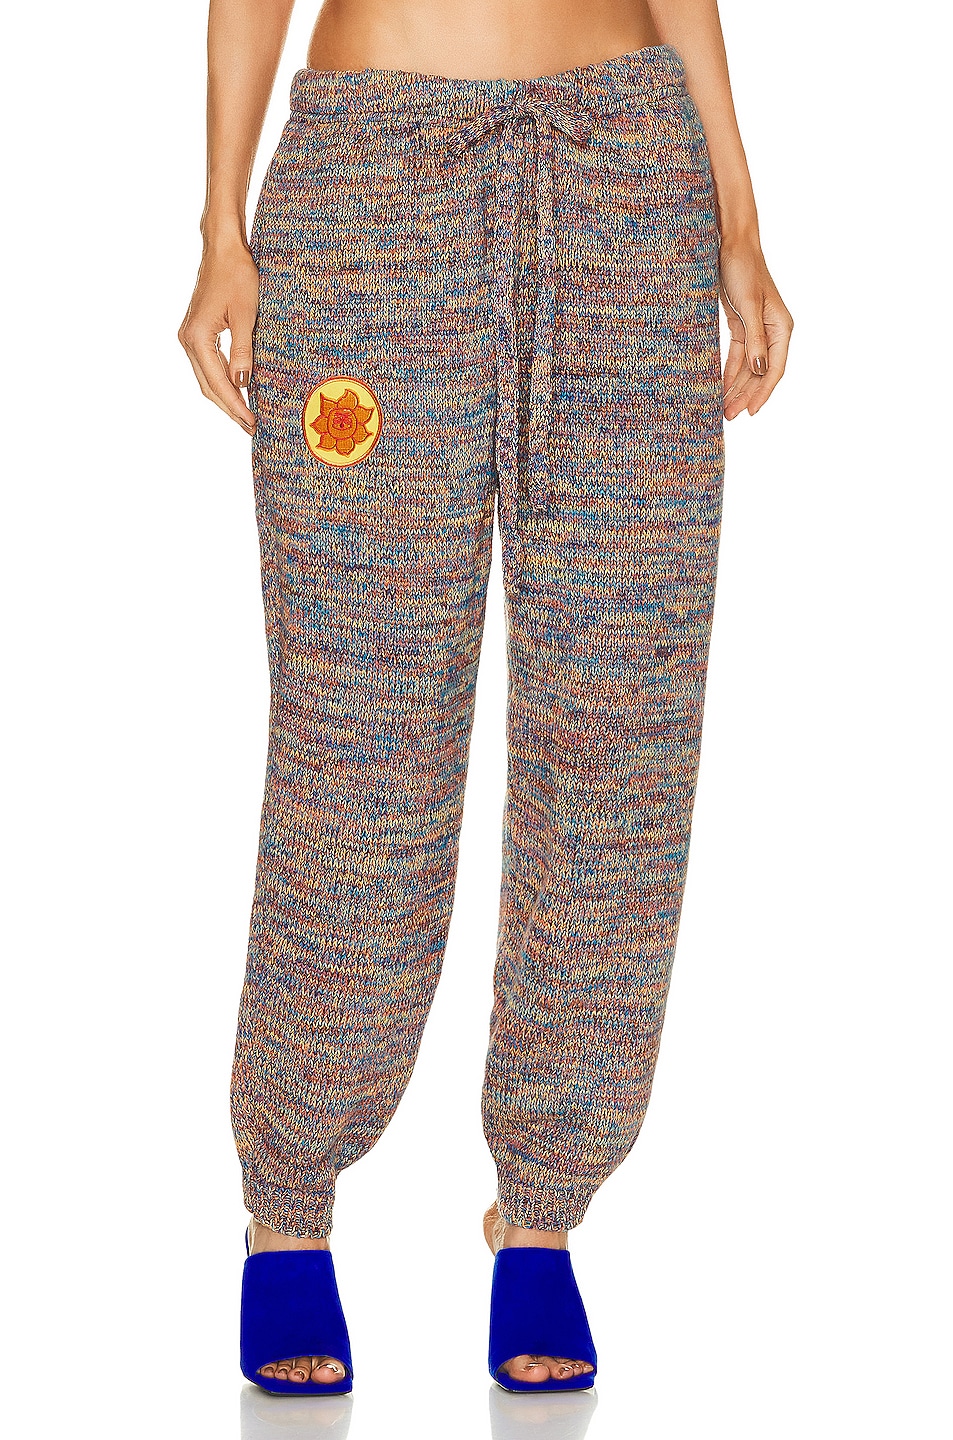 Image 1 of Camp High Knit Spectrum Sweatpants in Multi